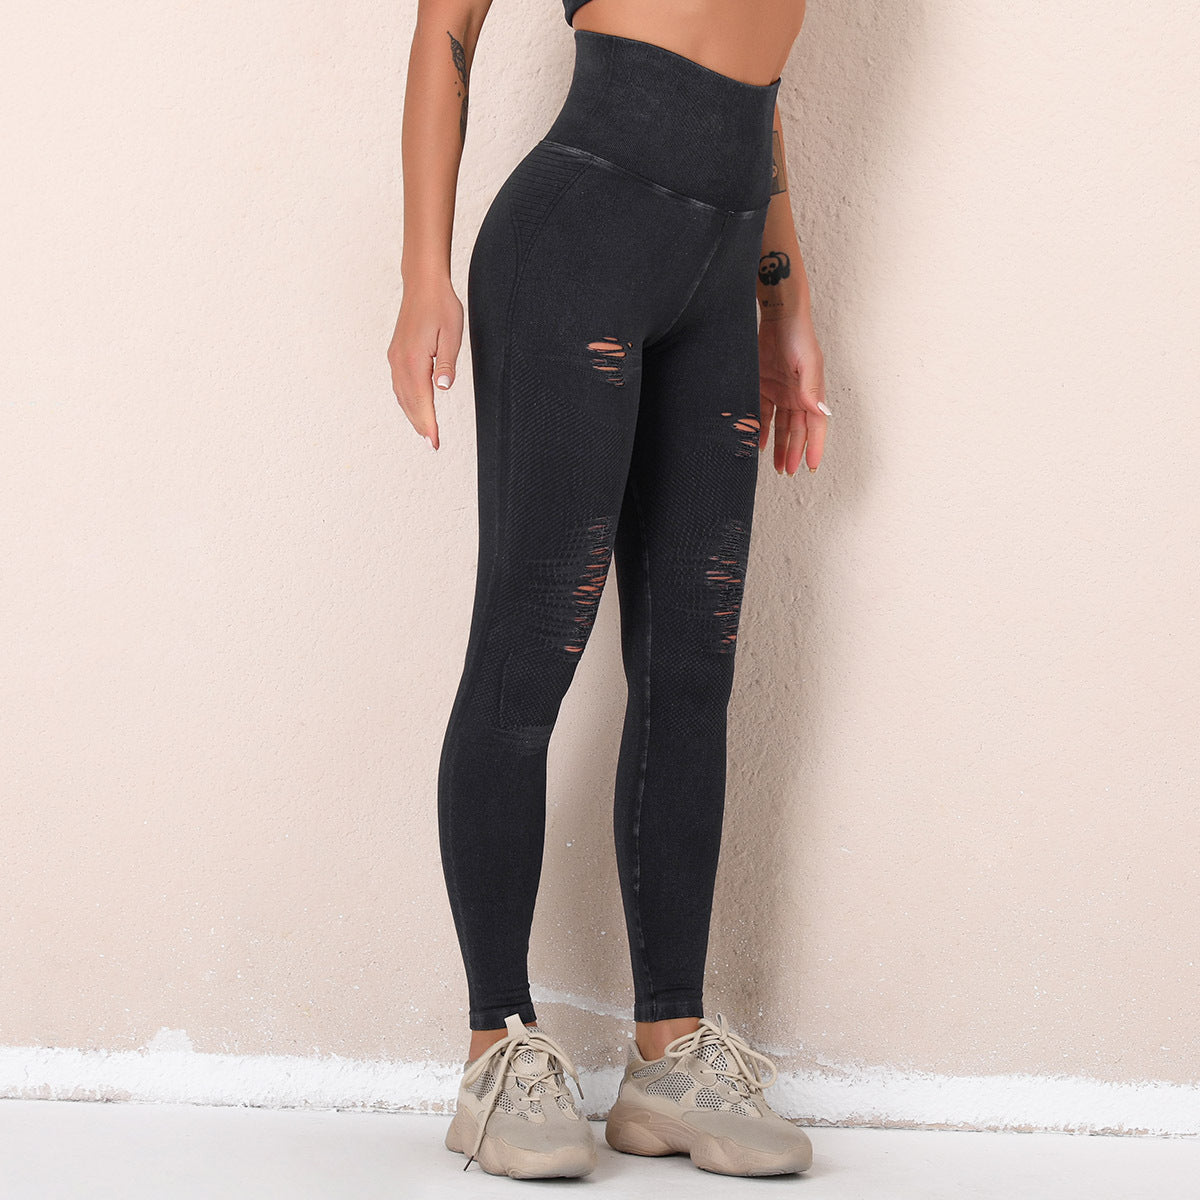 High waisted ripped active pants